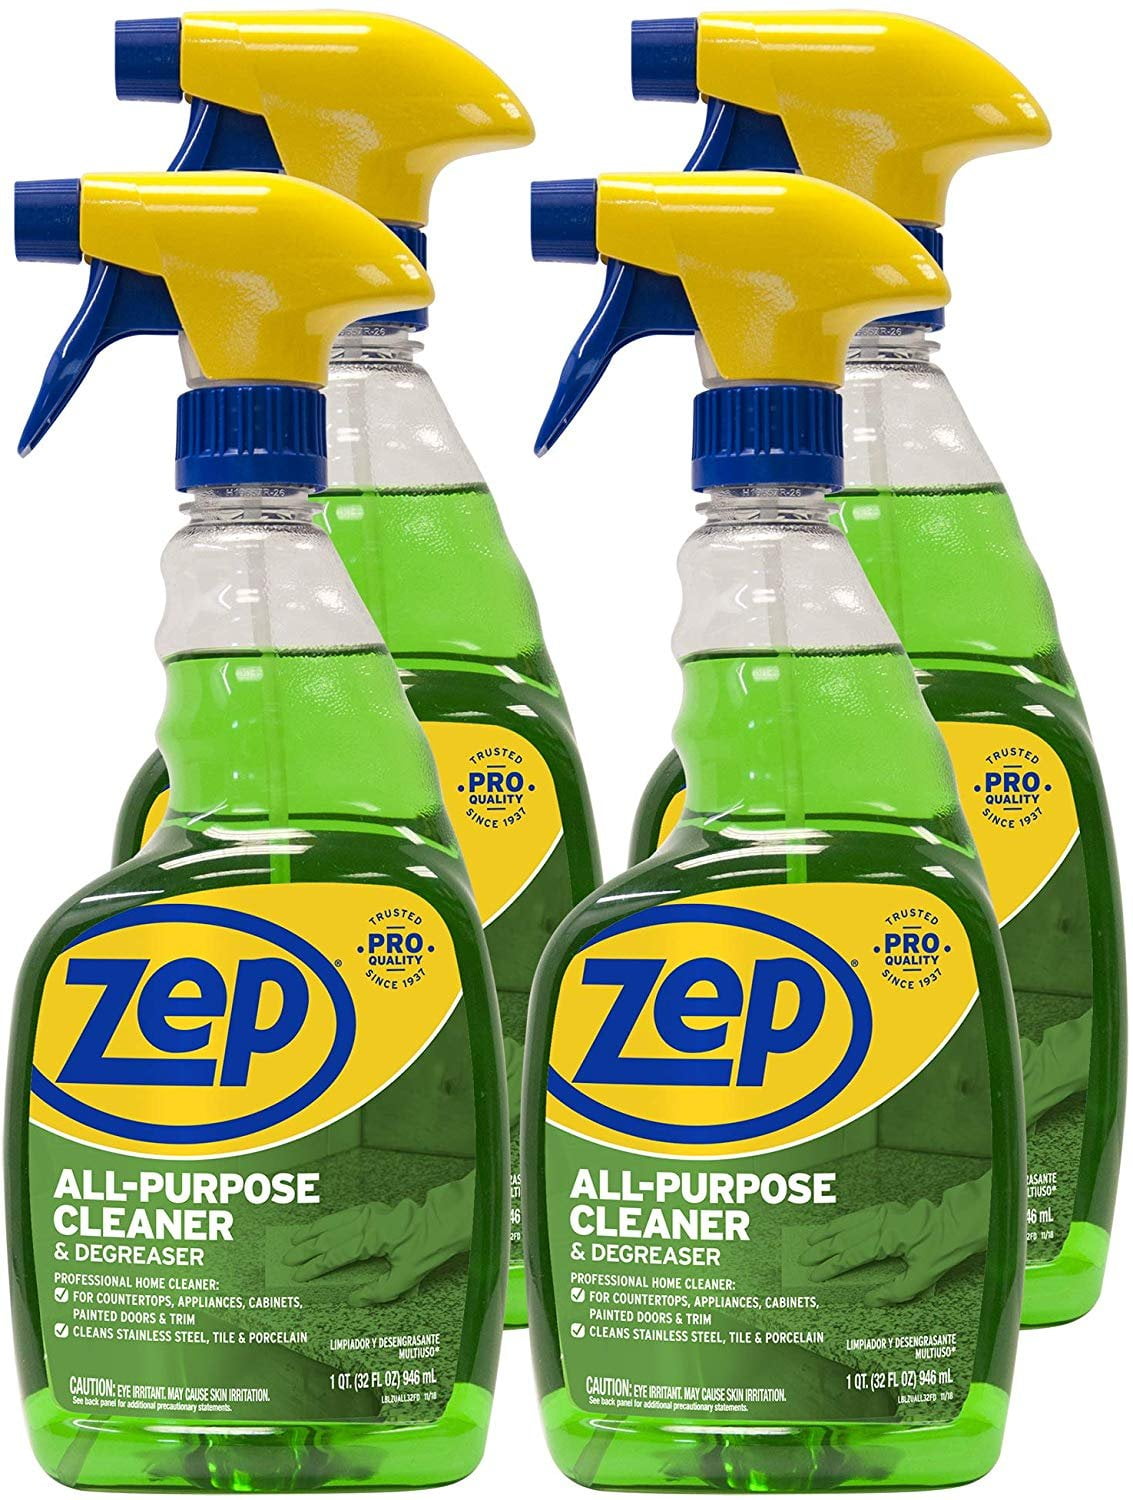 Zep Foaming Wall Cleaner - 18 Ounce (Case of 4) Zufwc18 - Removes Stains Without Damaging Finishes